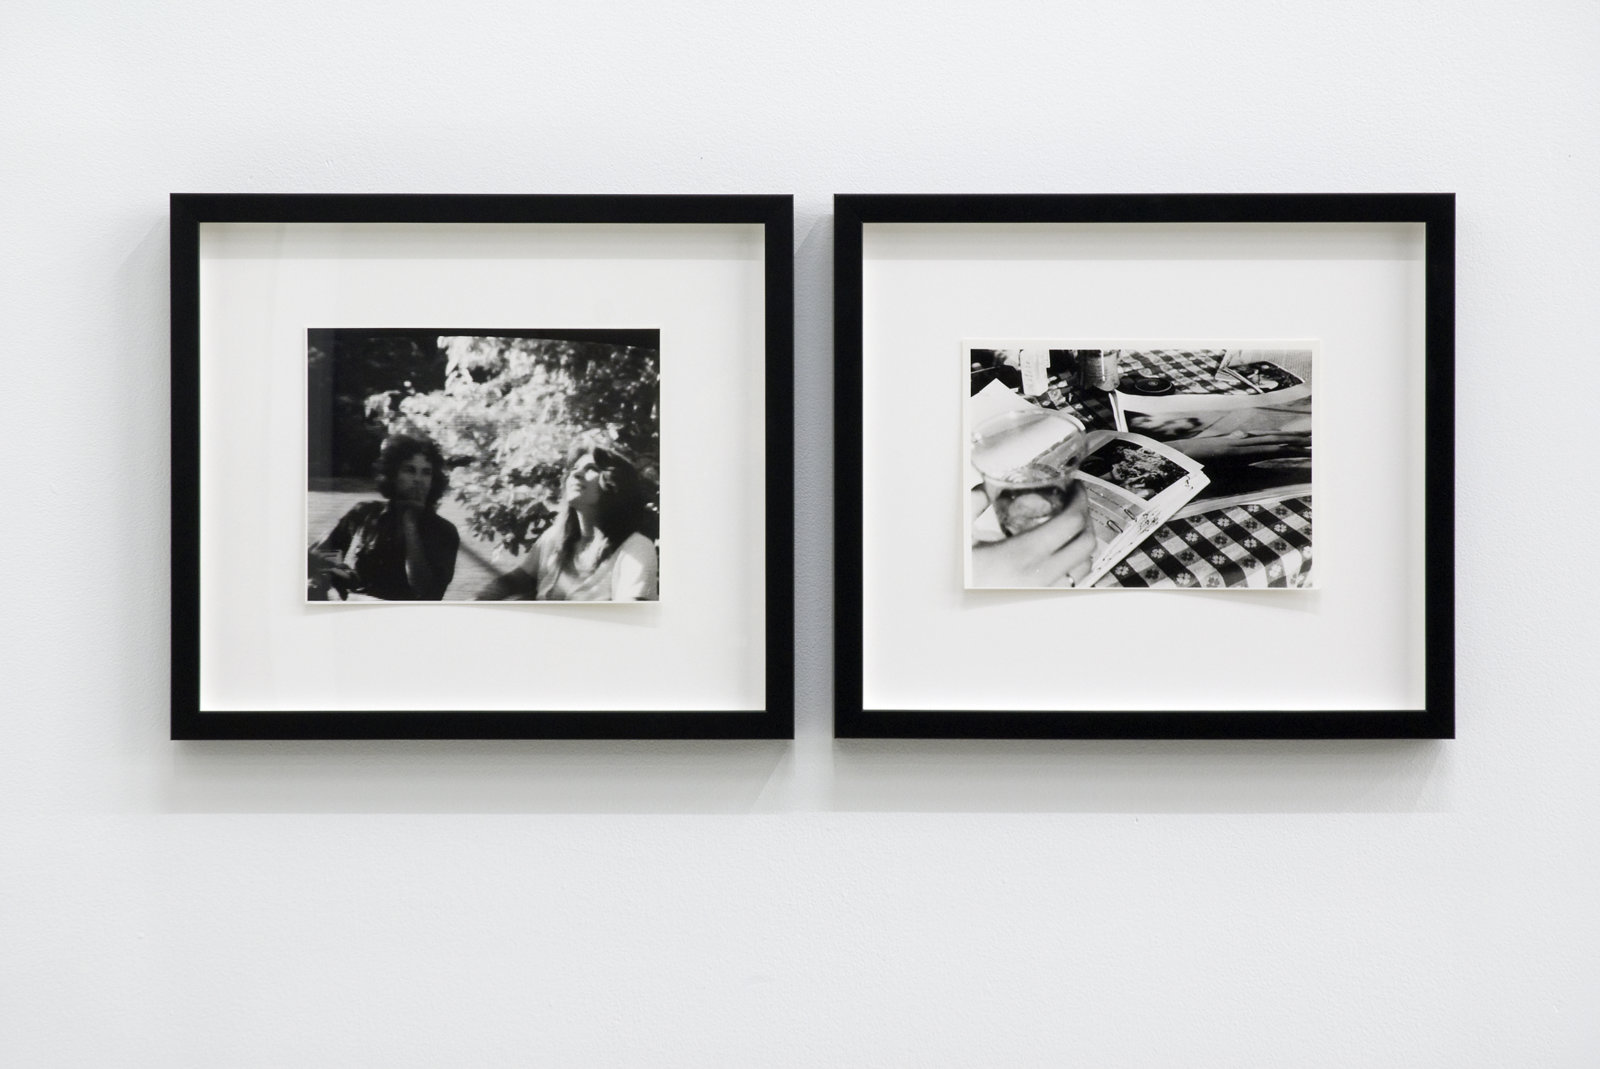 Ian Wallace, Studies for The Summer Script I &amp; II, 1973, 2 black and white photographs, each 15 x 17 in. (37 x 43 cm)